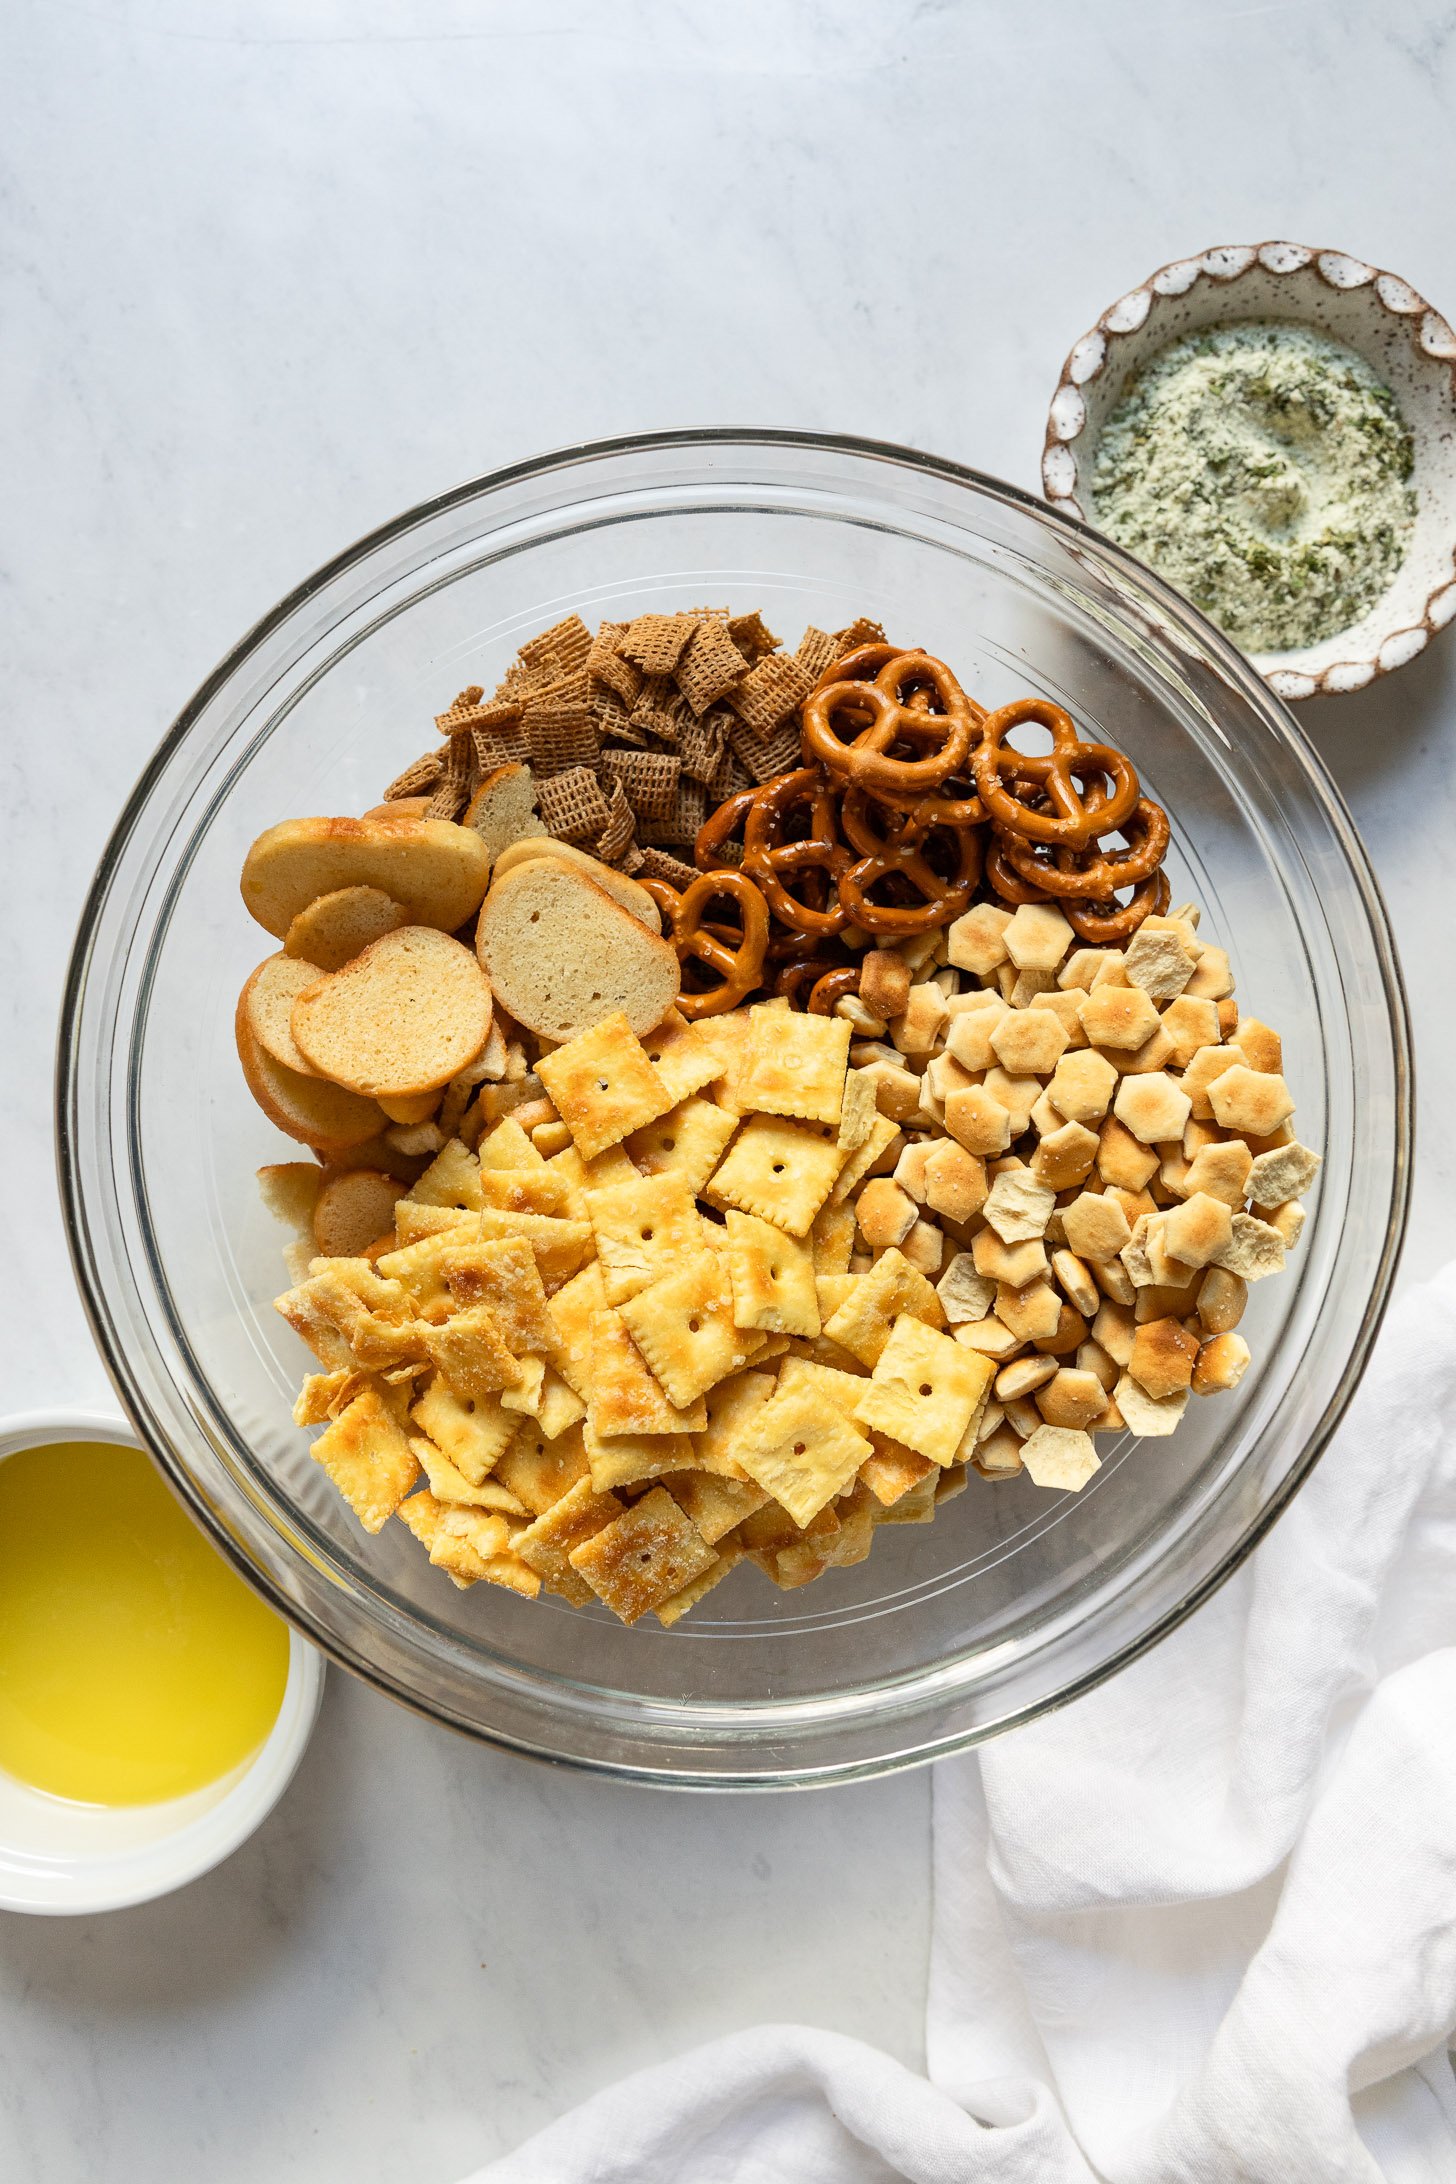 Bowl of bagel chips, cheese crackers, oyster crackers, pretzels, and wheat cereal next to bowls of ranch seasoning and melted butter.